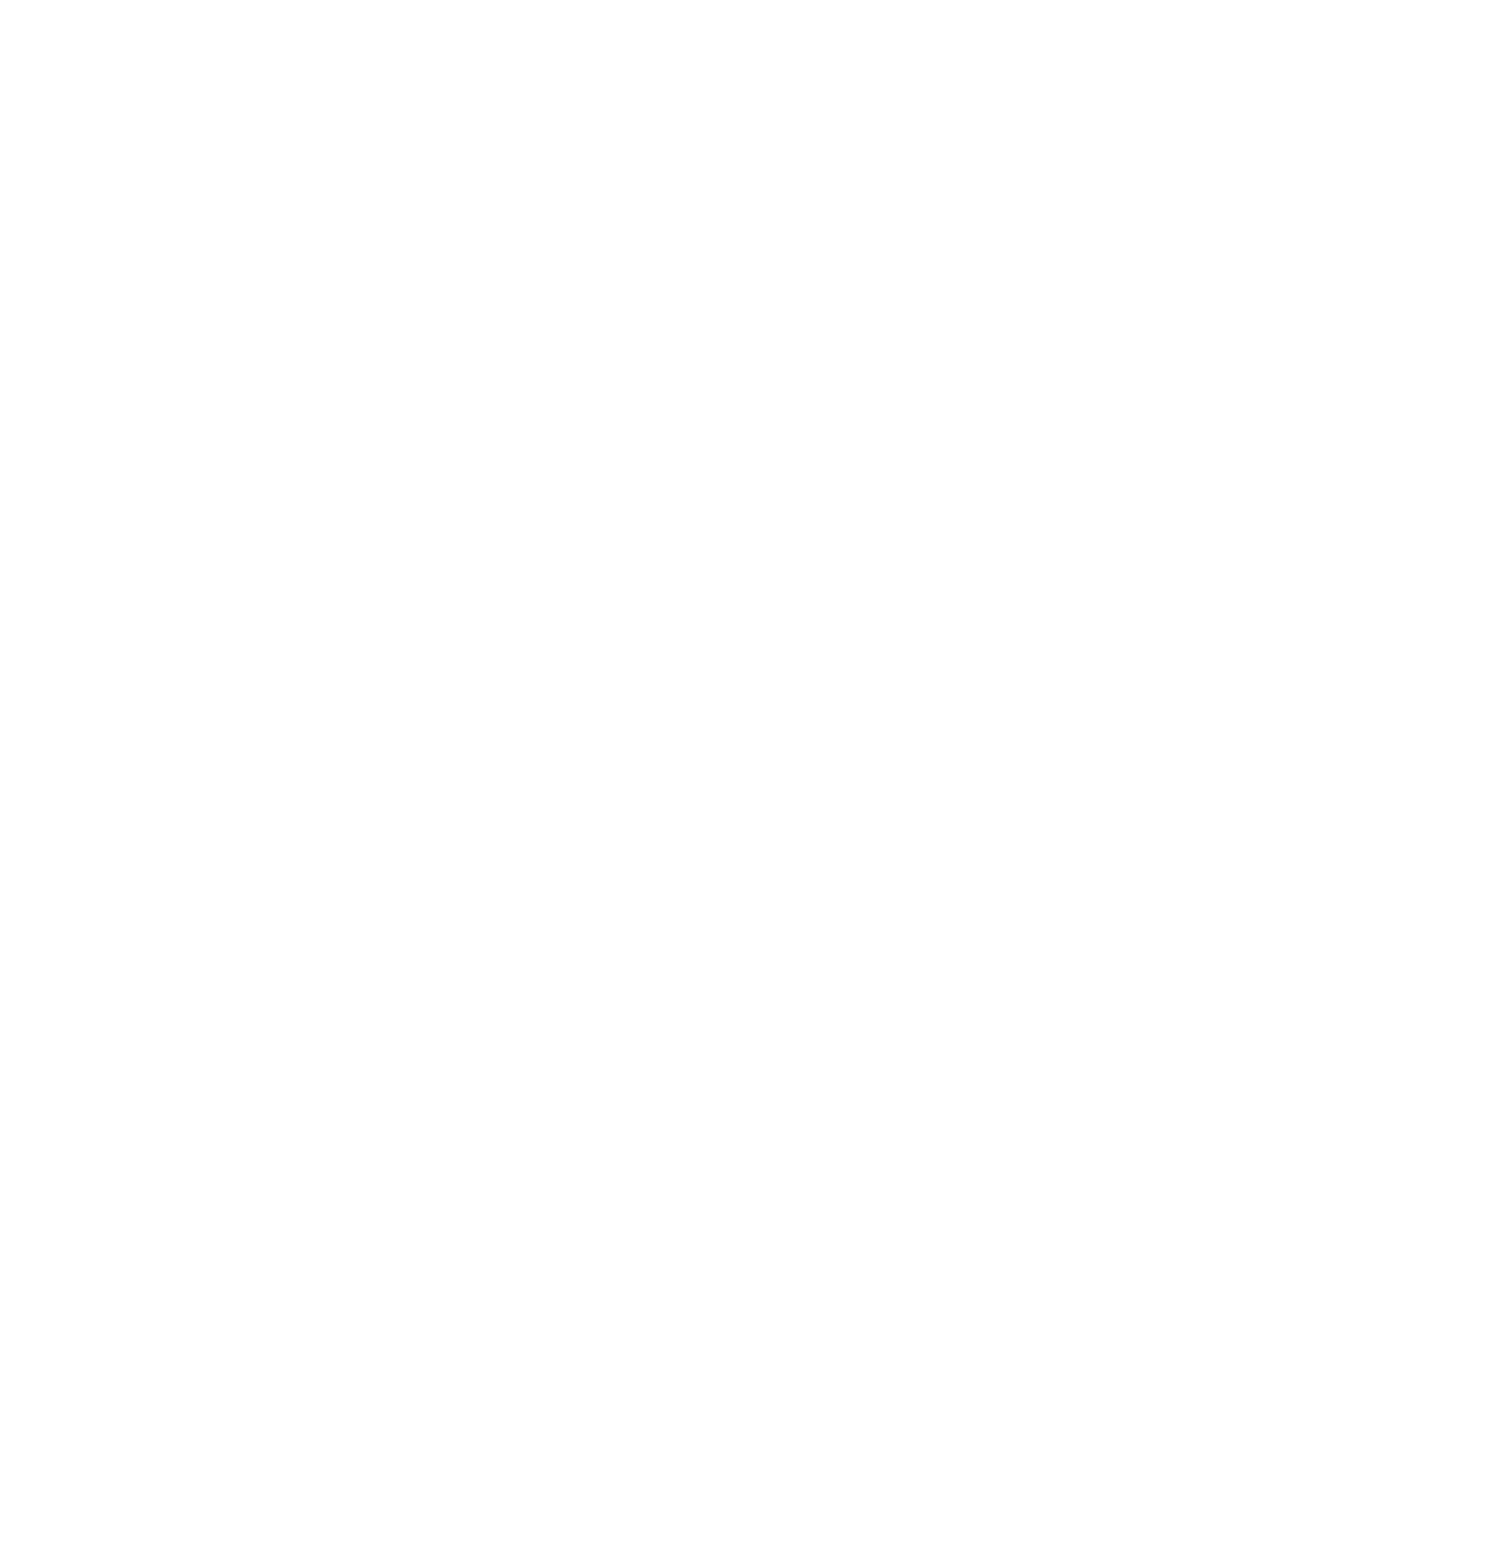 Jersey County Health Department Demo